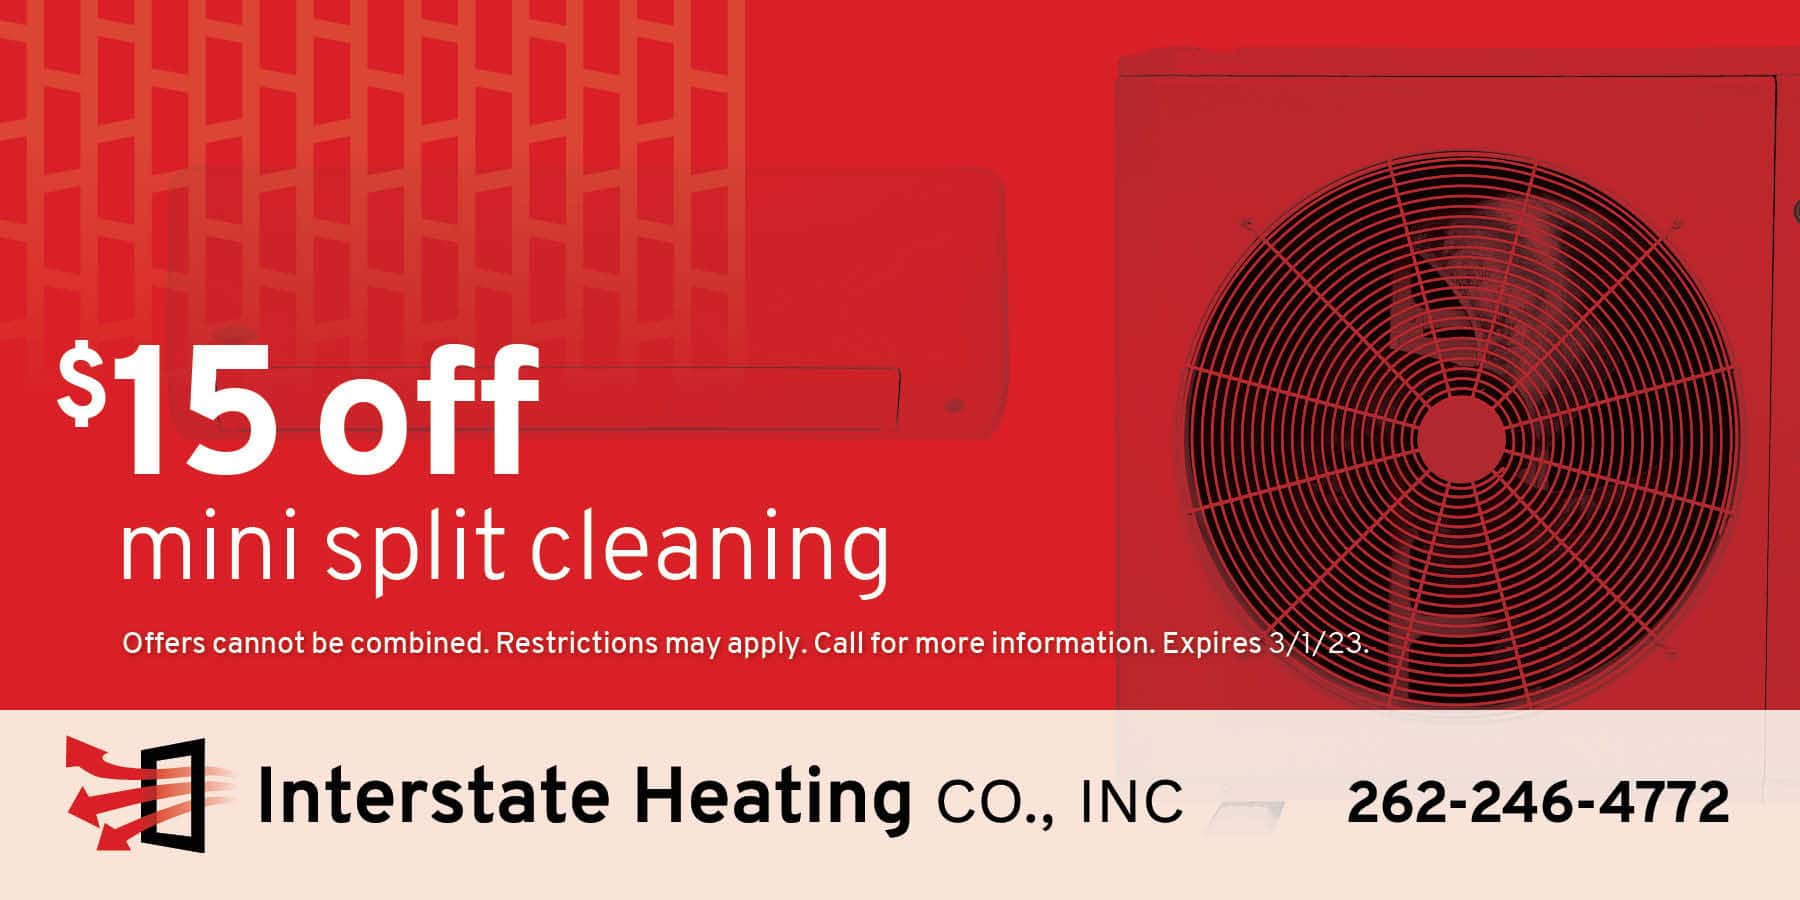 $15 Off mini-split cleaning at Interstate Heating Co.